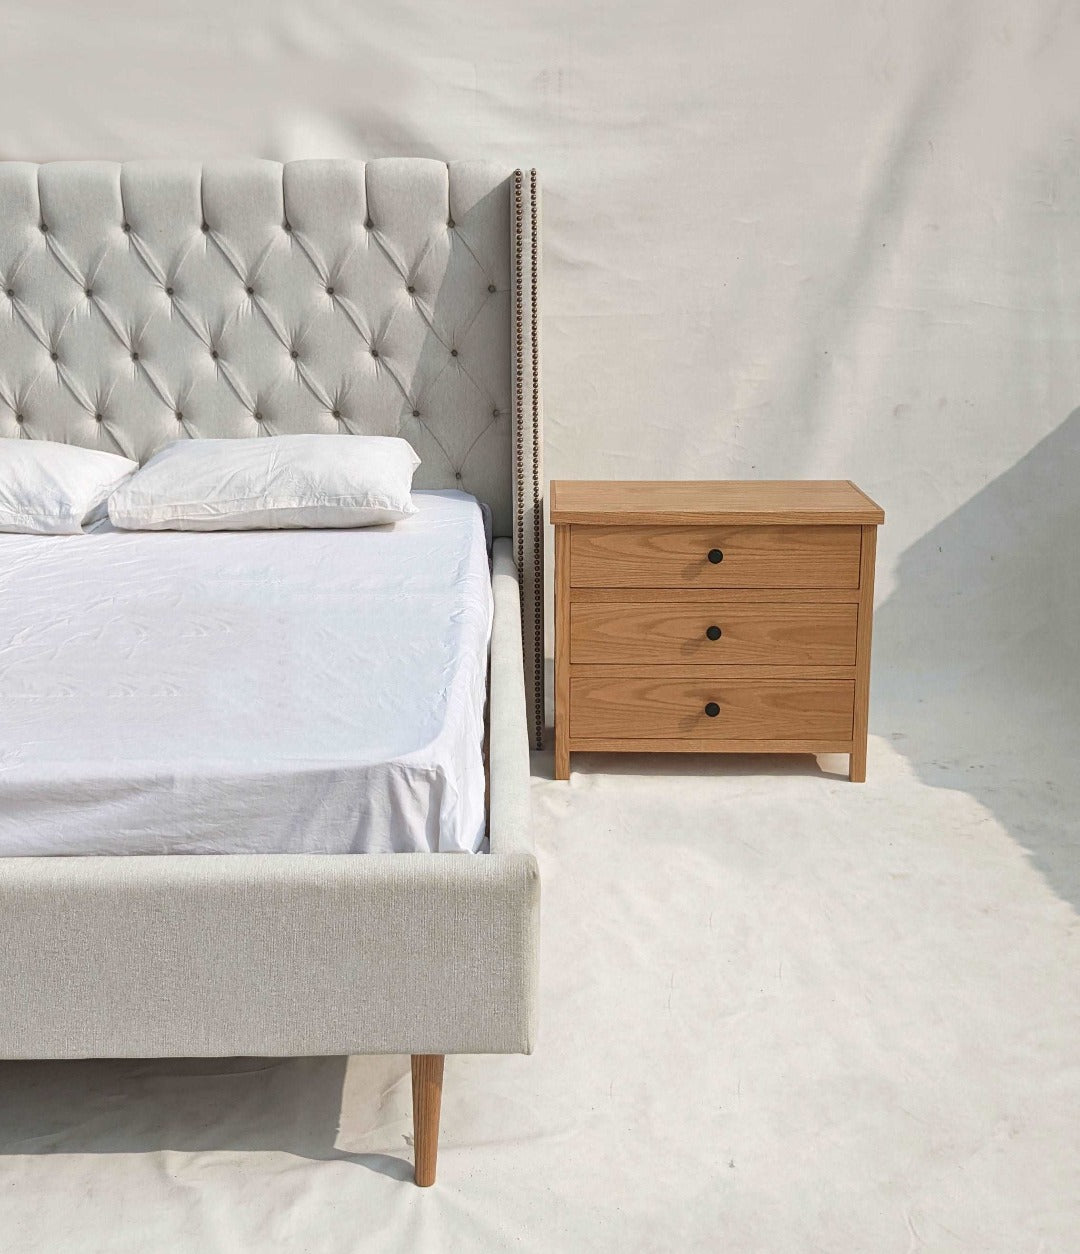 Embrace timeless comfort with our Cozy Classic Tufted Bed. Its elegant design and plush upholstery create a sanctuary of relaxation in any bedroom.